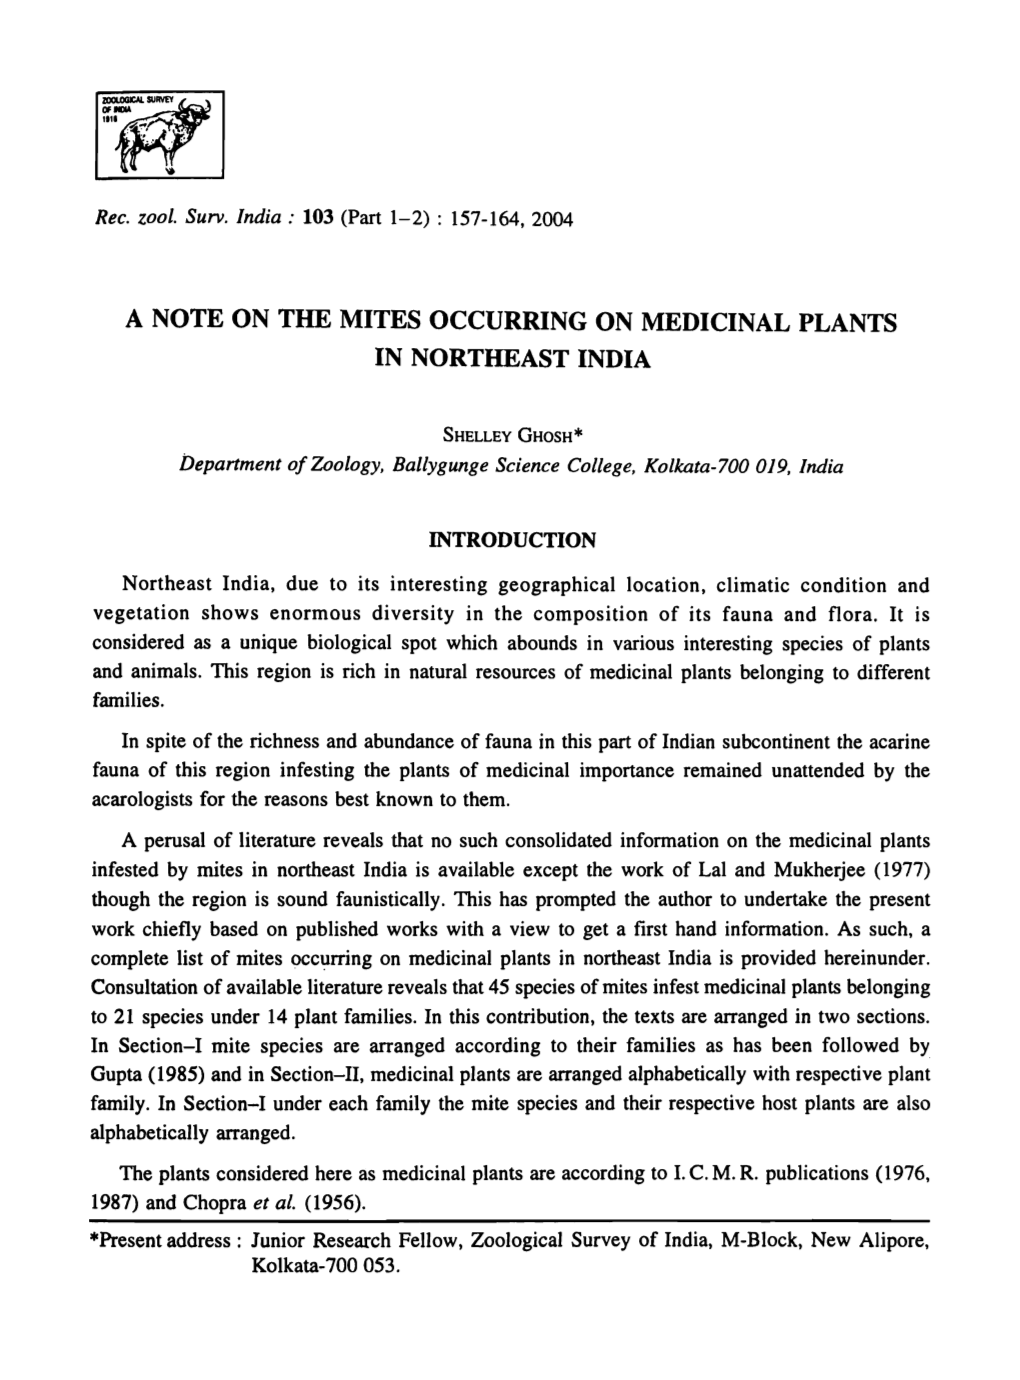 A Note on the Mites Occurring on Medicinal Plants in Northeast India